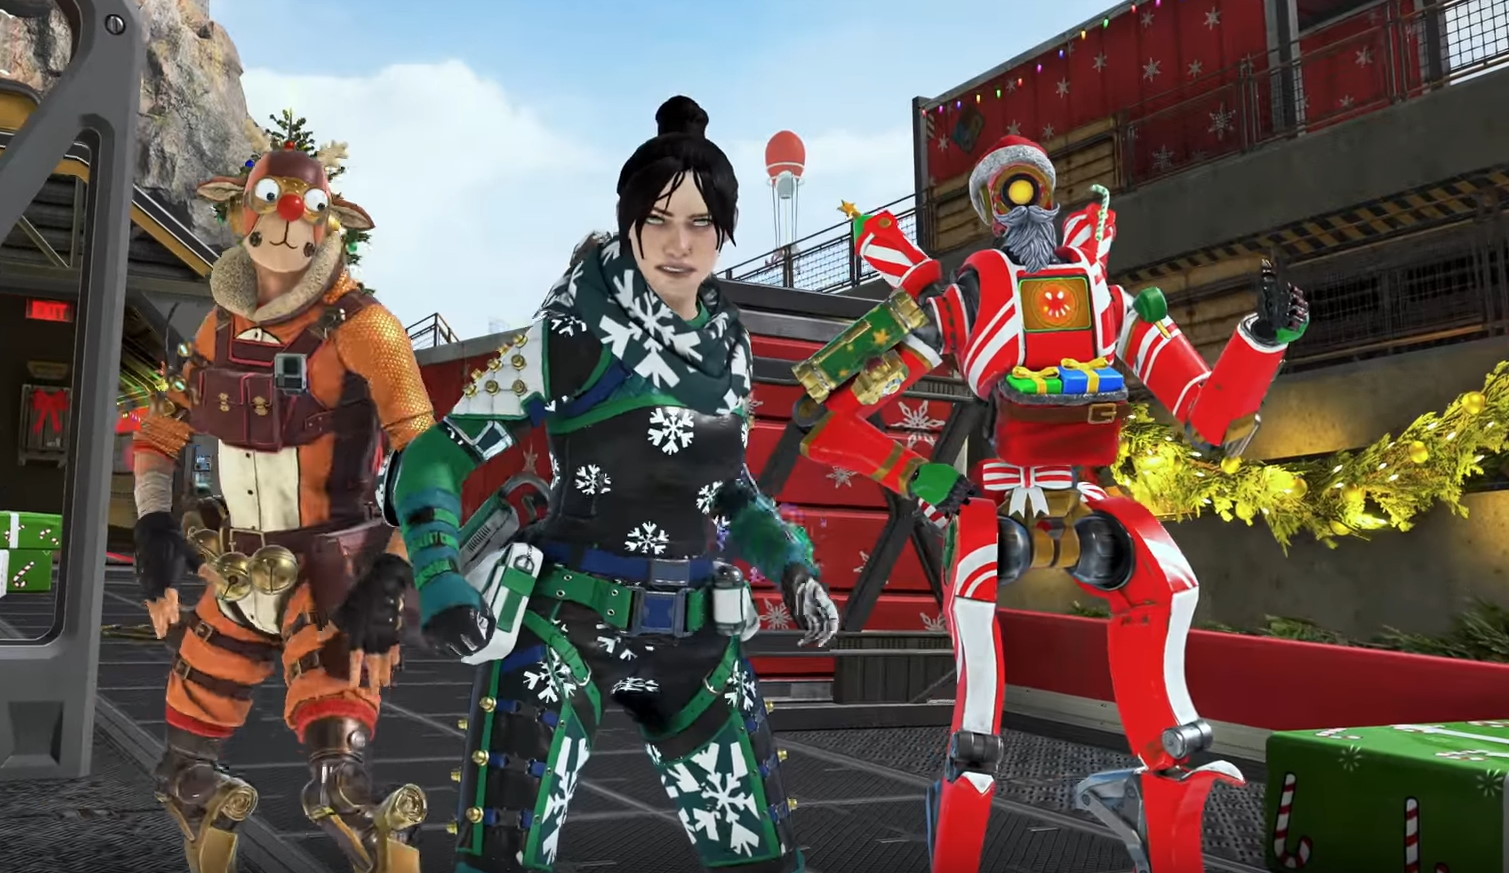 Apex Legends Holo Day Bash Is Live Now With A New Ltm And Holiday Cosmetics Pc Gamer